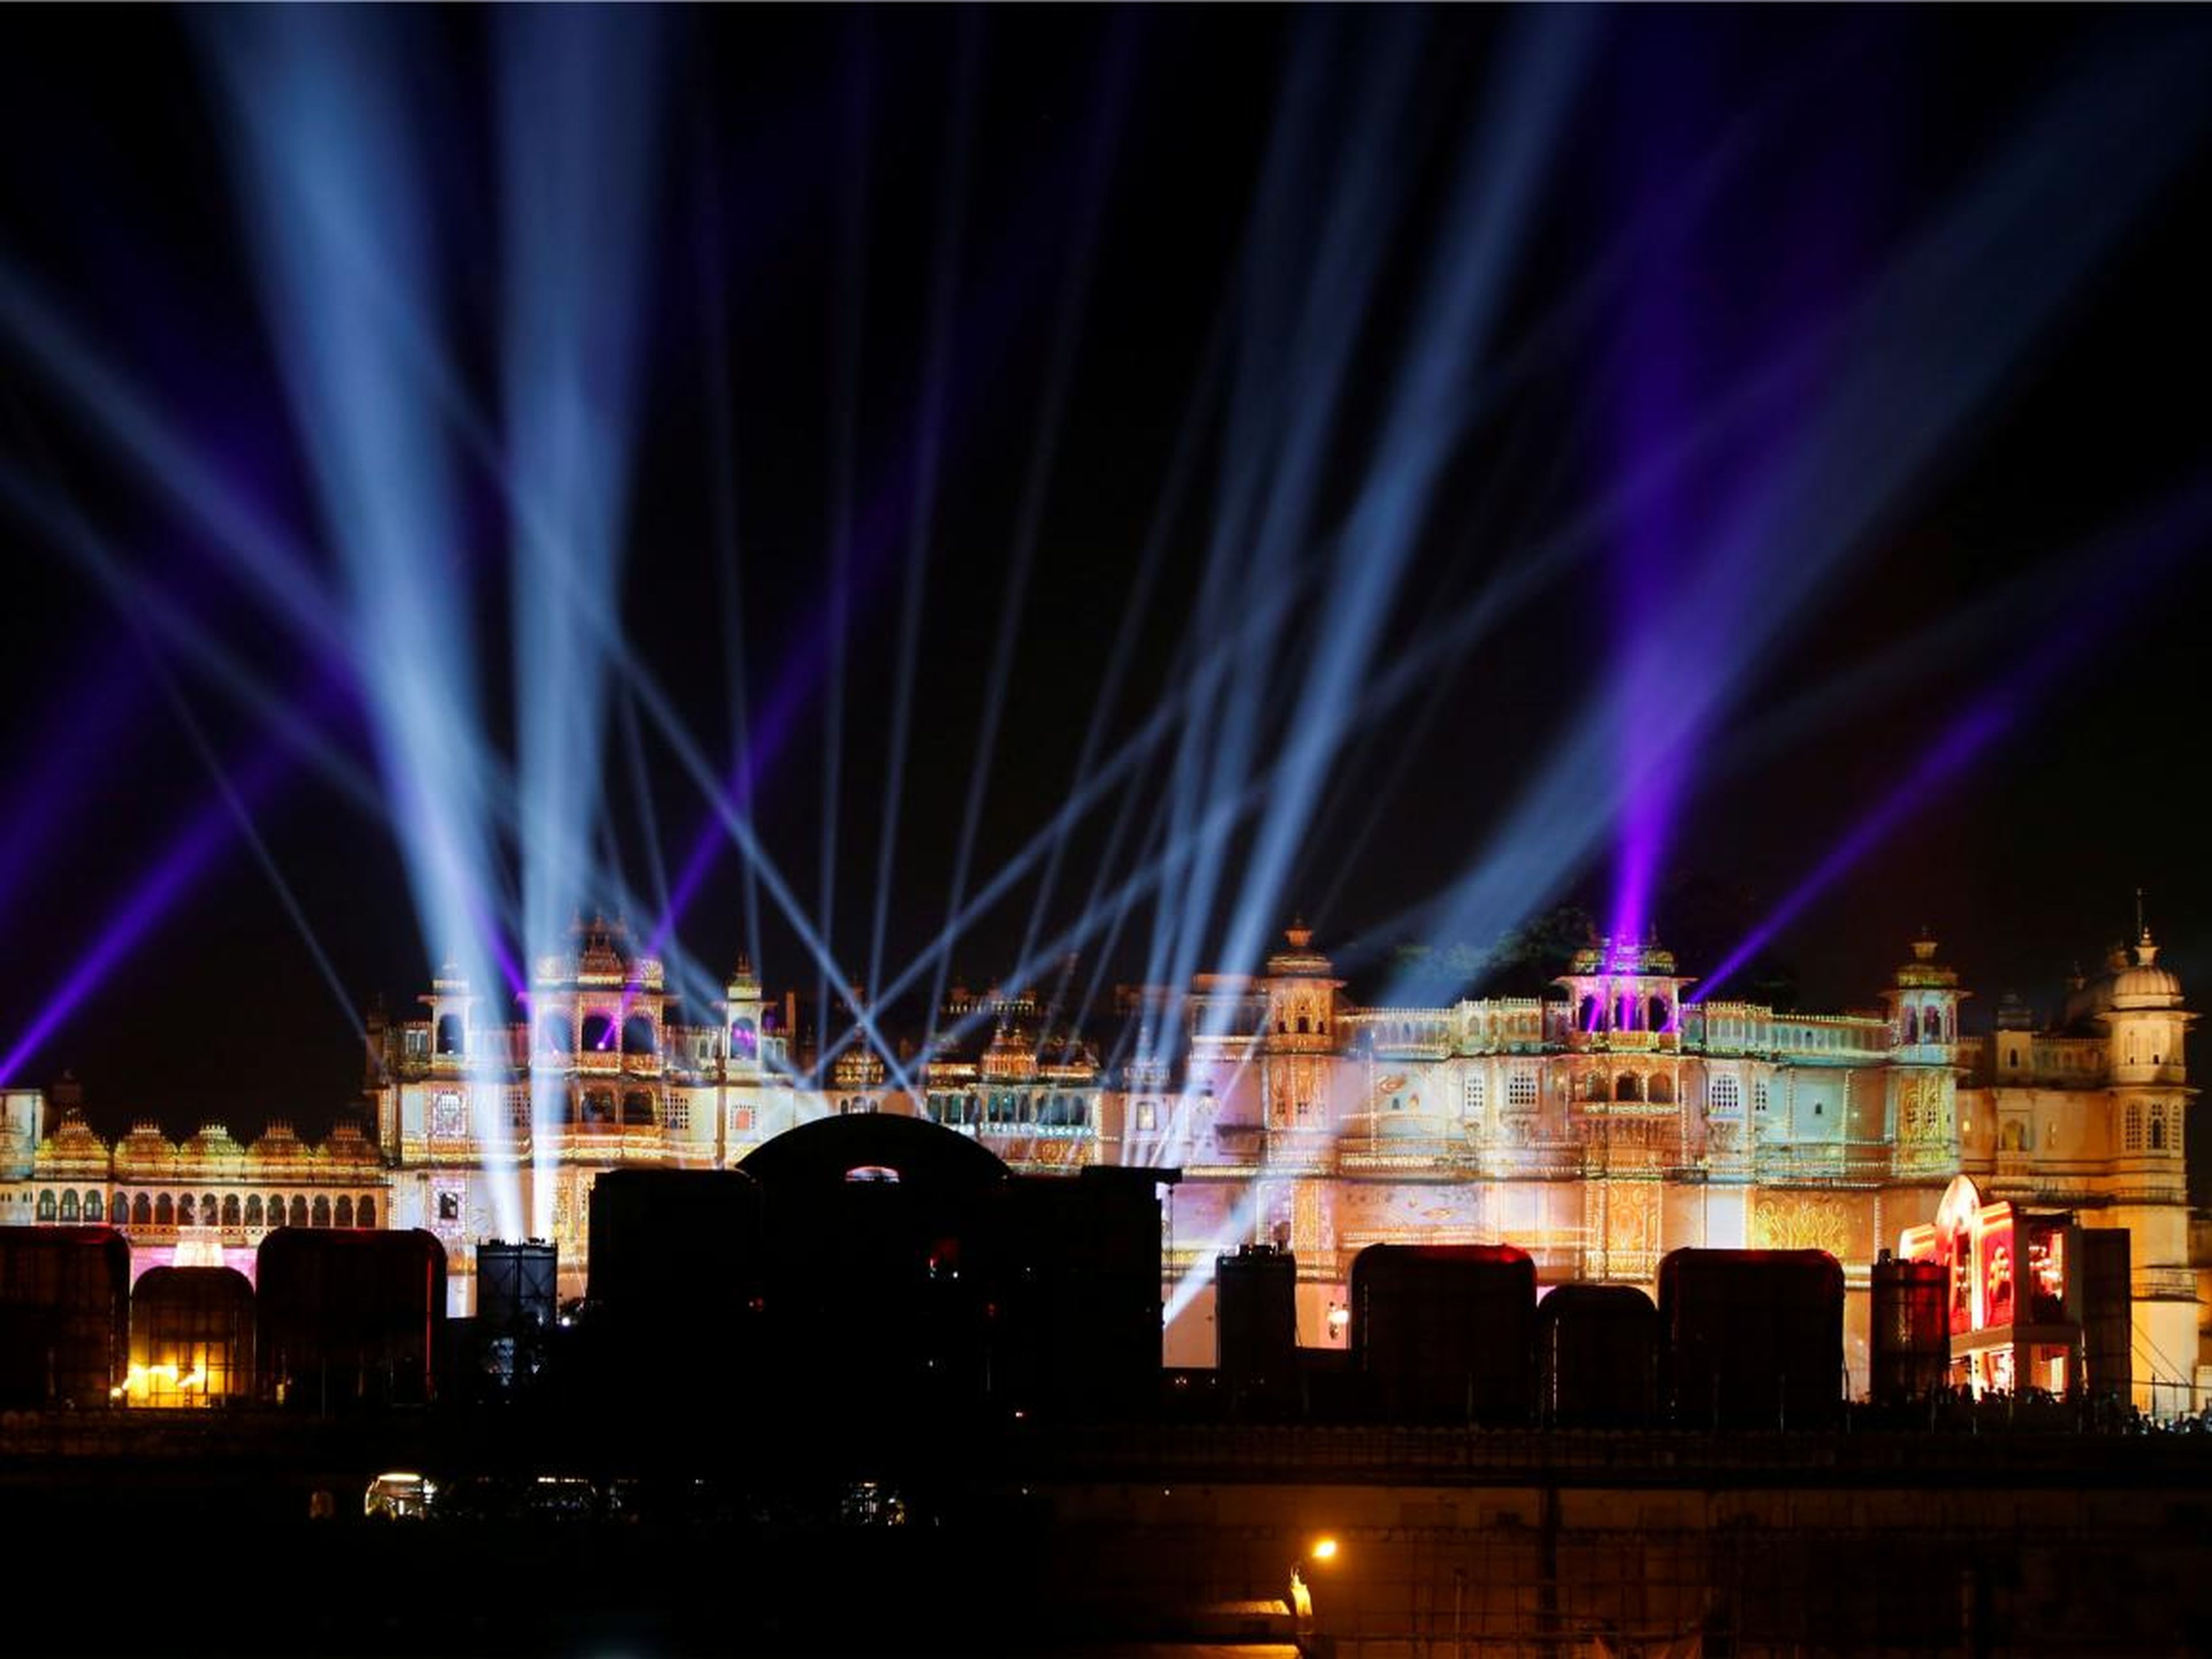 A view of the illuminated City Palace in Udaipur, one of the venues for the pre-wedding celebrations of Isha Ambani.